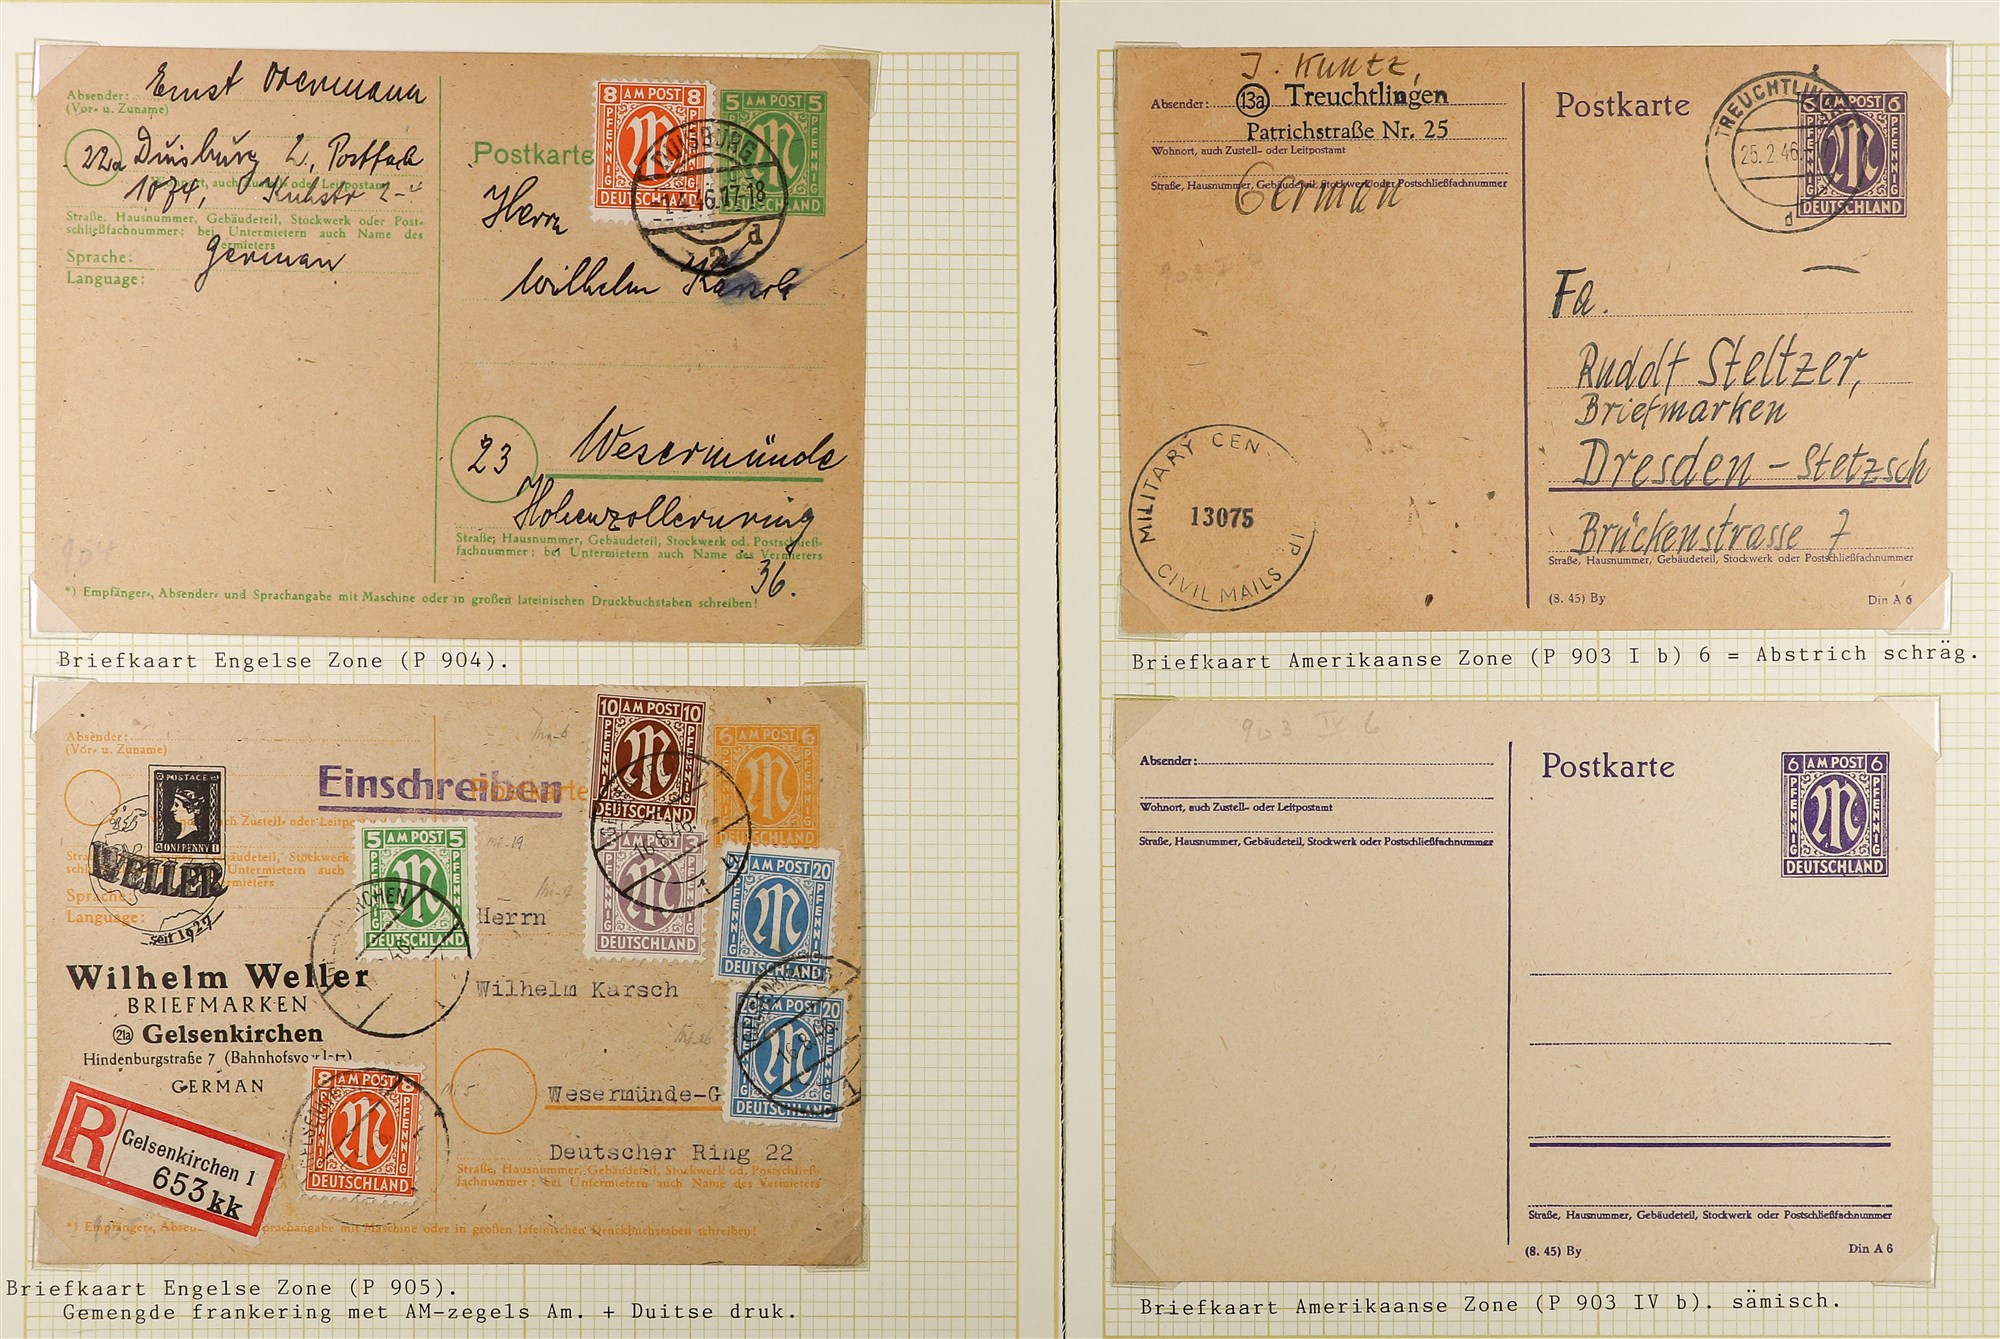 GERMAN ALLIED ZONES 1945 - 1951 COVERS COLLECTION around 60 items from various allied zones, - Image 4 of 16